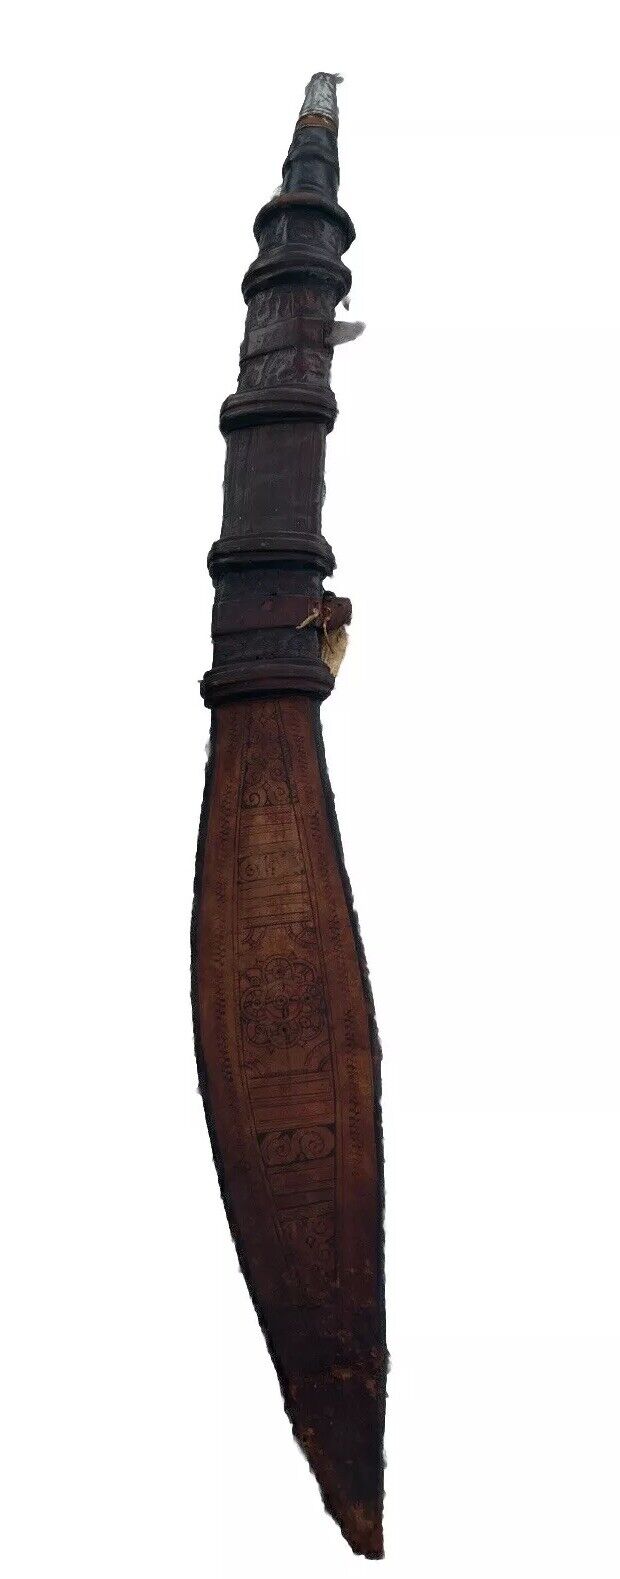 Vintage African Tribal Ceremonial Engraved Sword With Decorated Leather Sheath